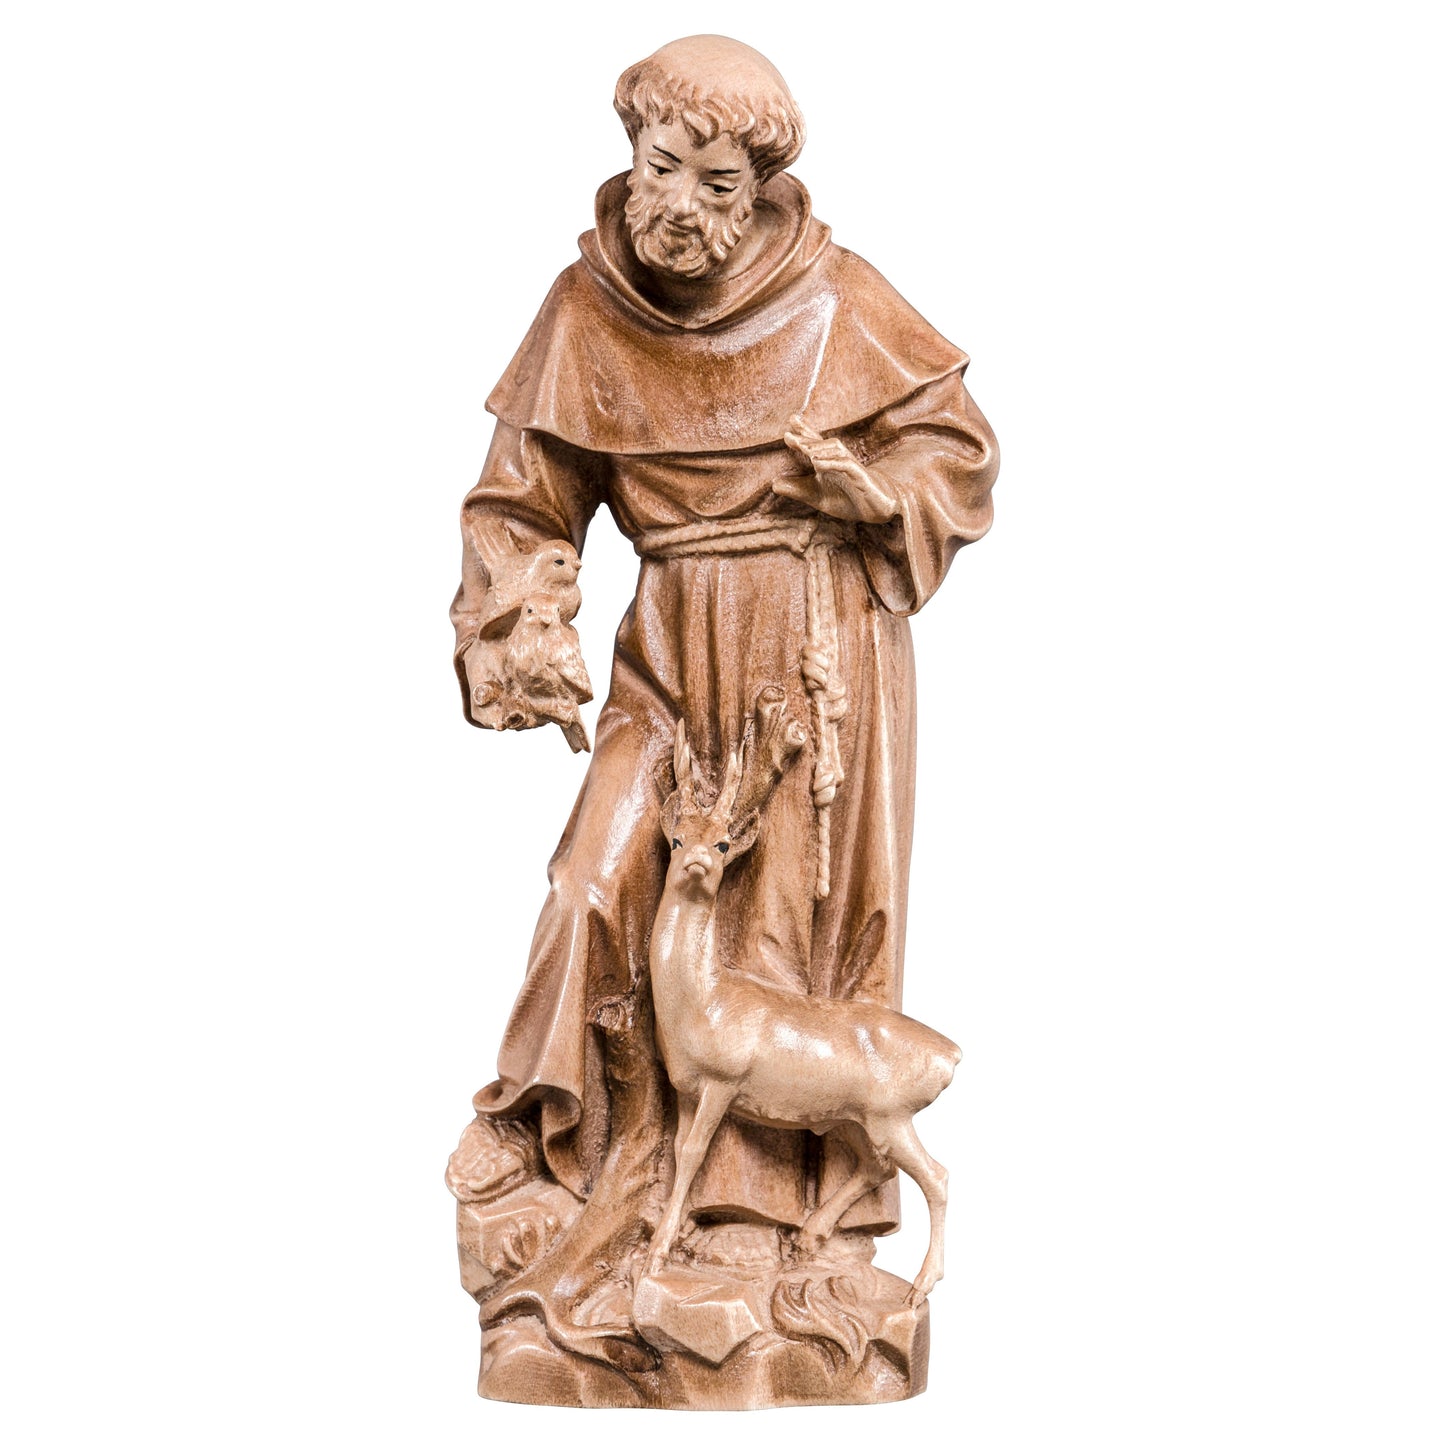 Mondo Cattolico Glossy / 10 cm (3.9 in) Wooden statue of St. Francis